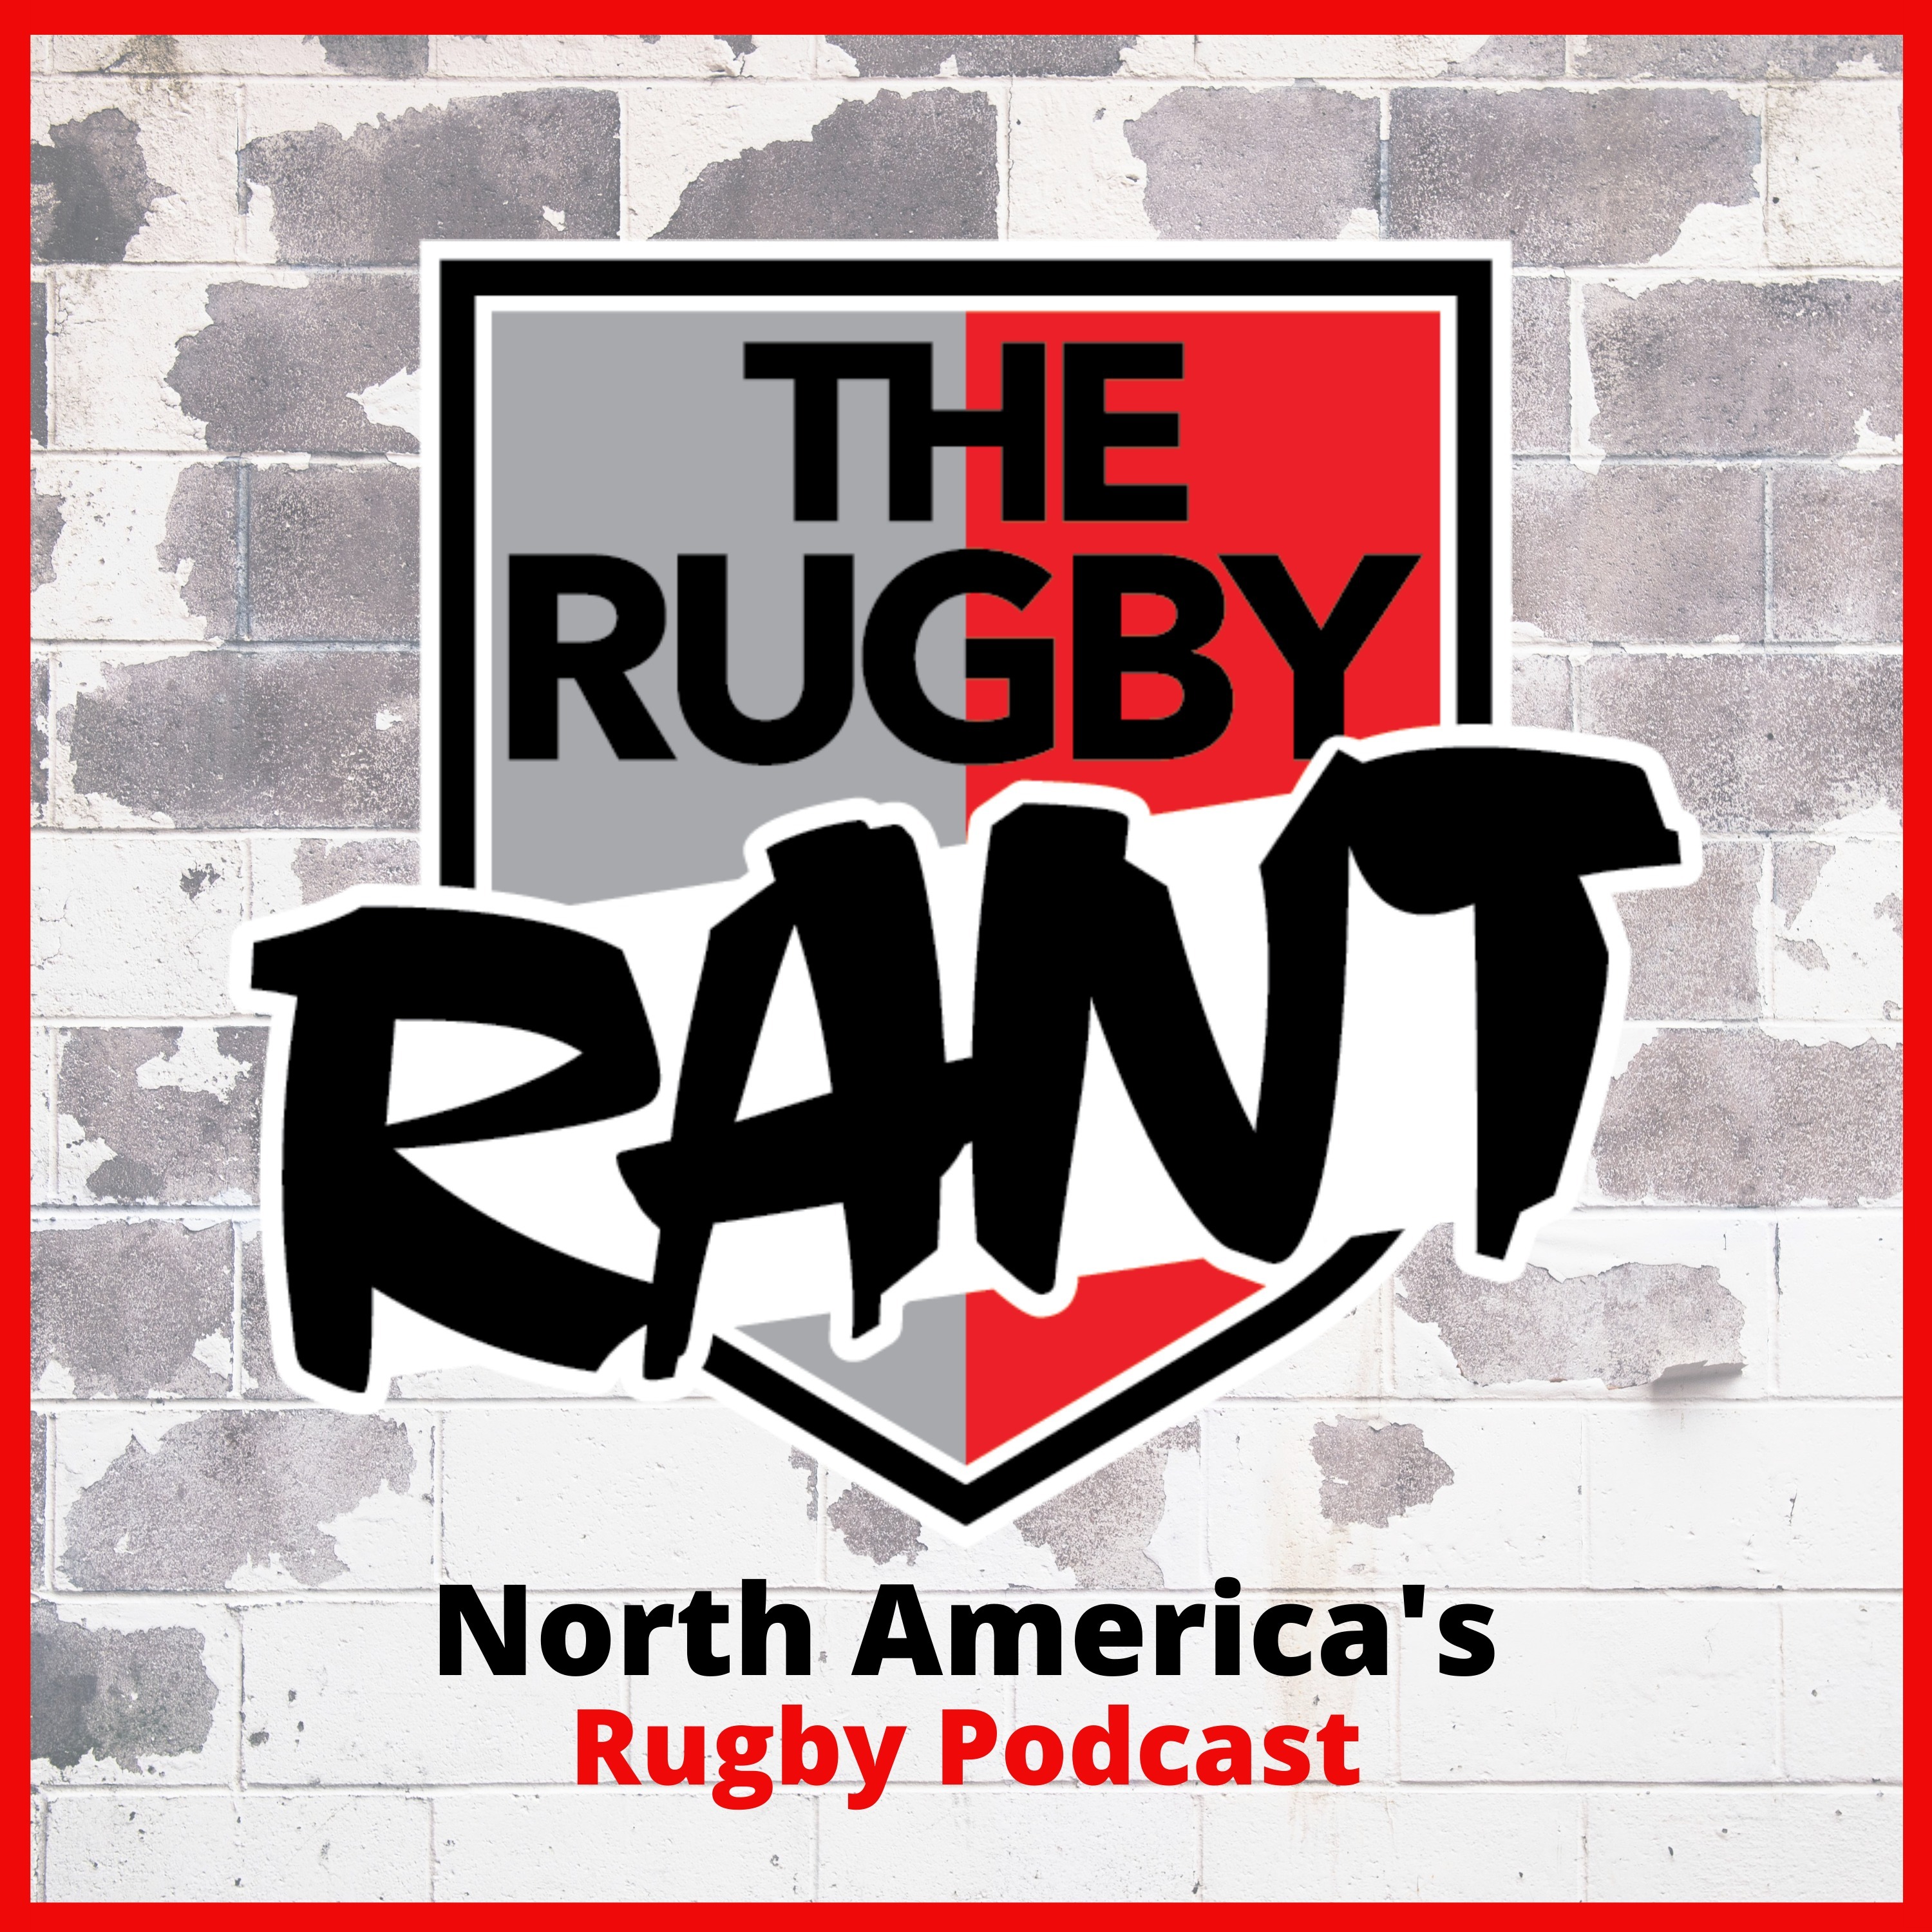 The Rugby Rant - Run, Pass or Kick with Will Magie